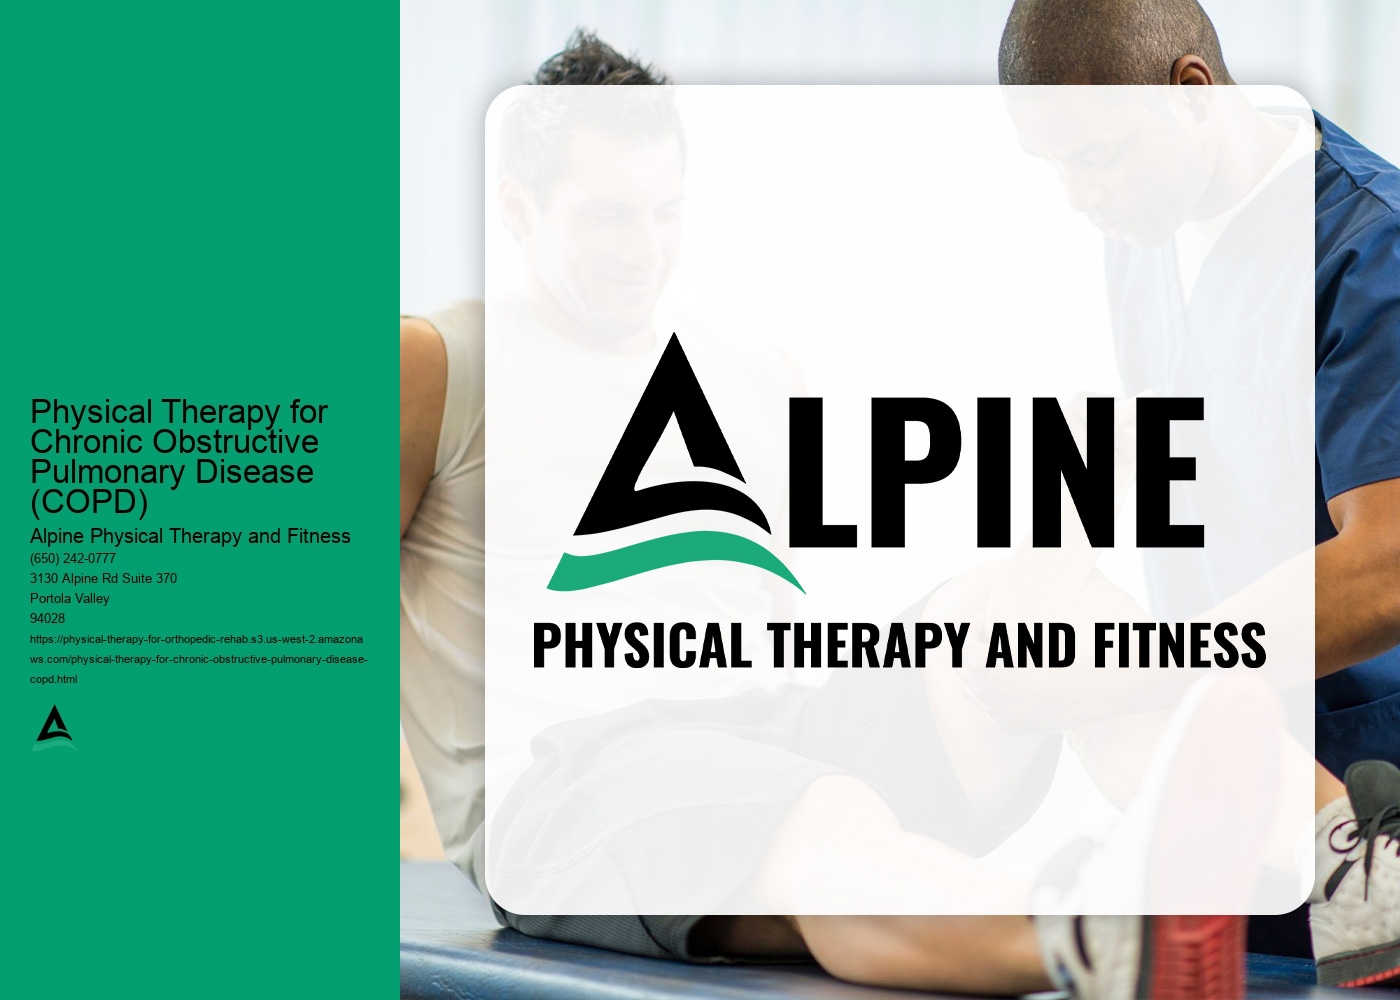 Are there any additional benefits of physical therapy for COPD, such as improving quality of life or reducing anxiety?